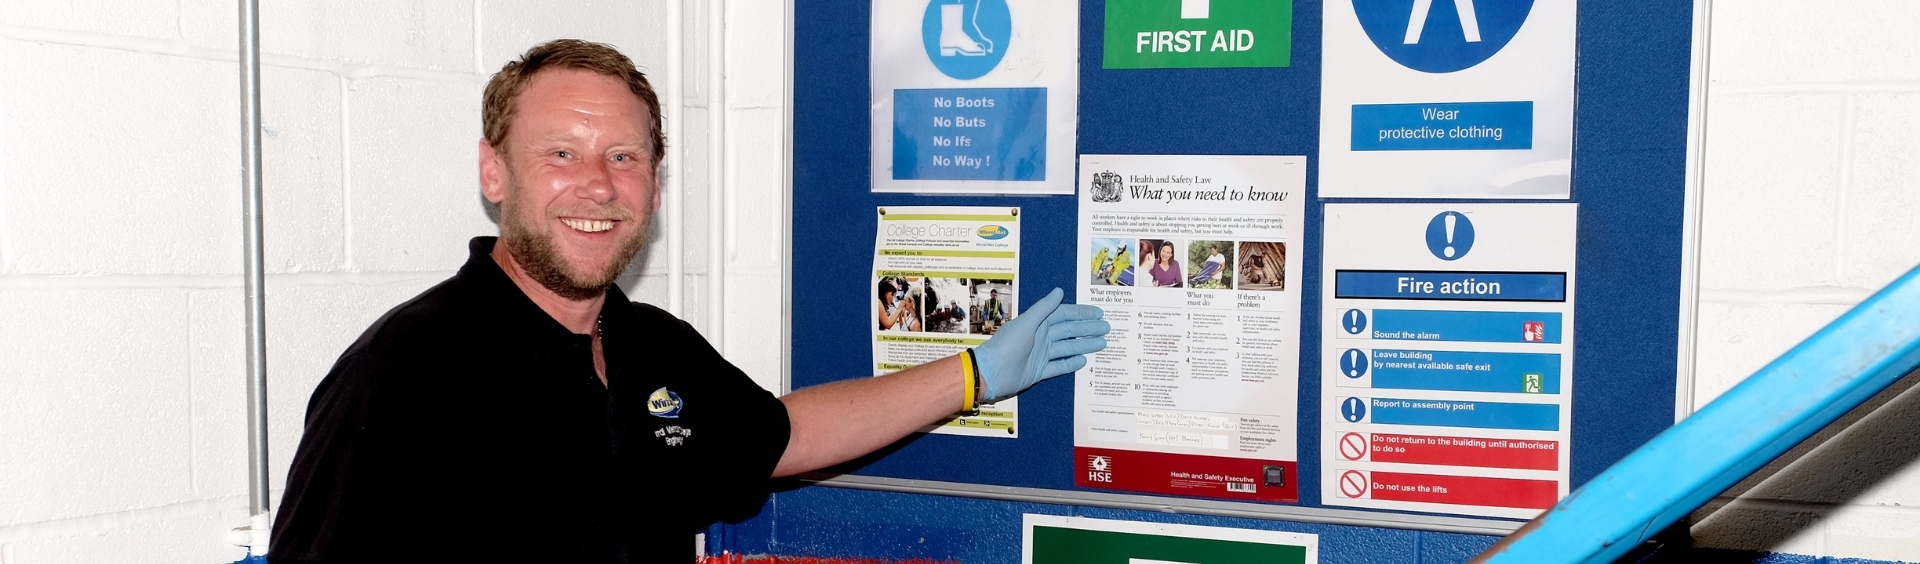 WMC NEBOSH General Certificate Unit NG1 student pointing at Health and Safety noticeboard